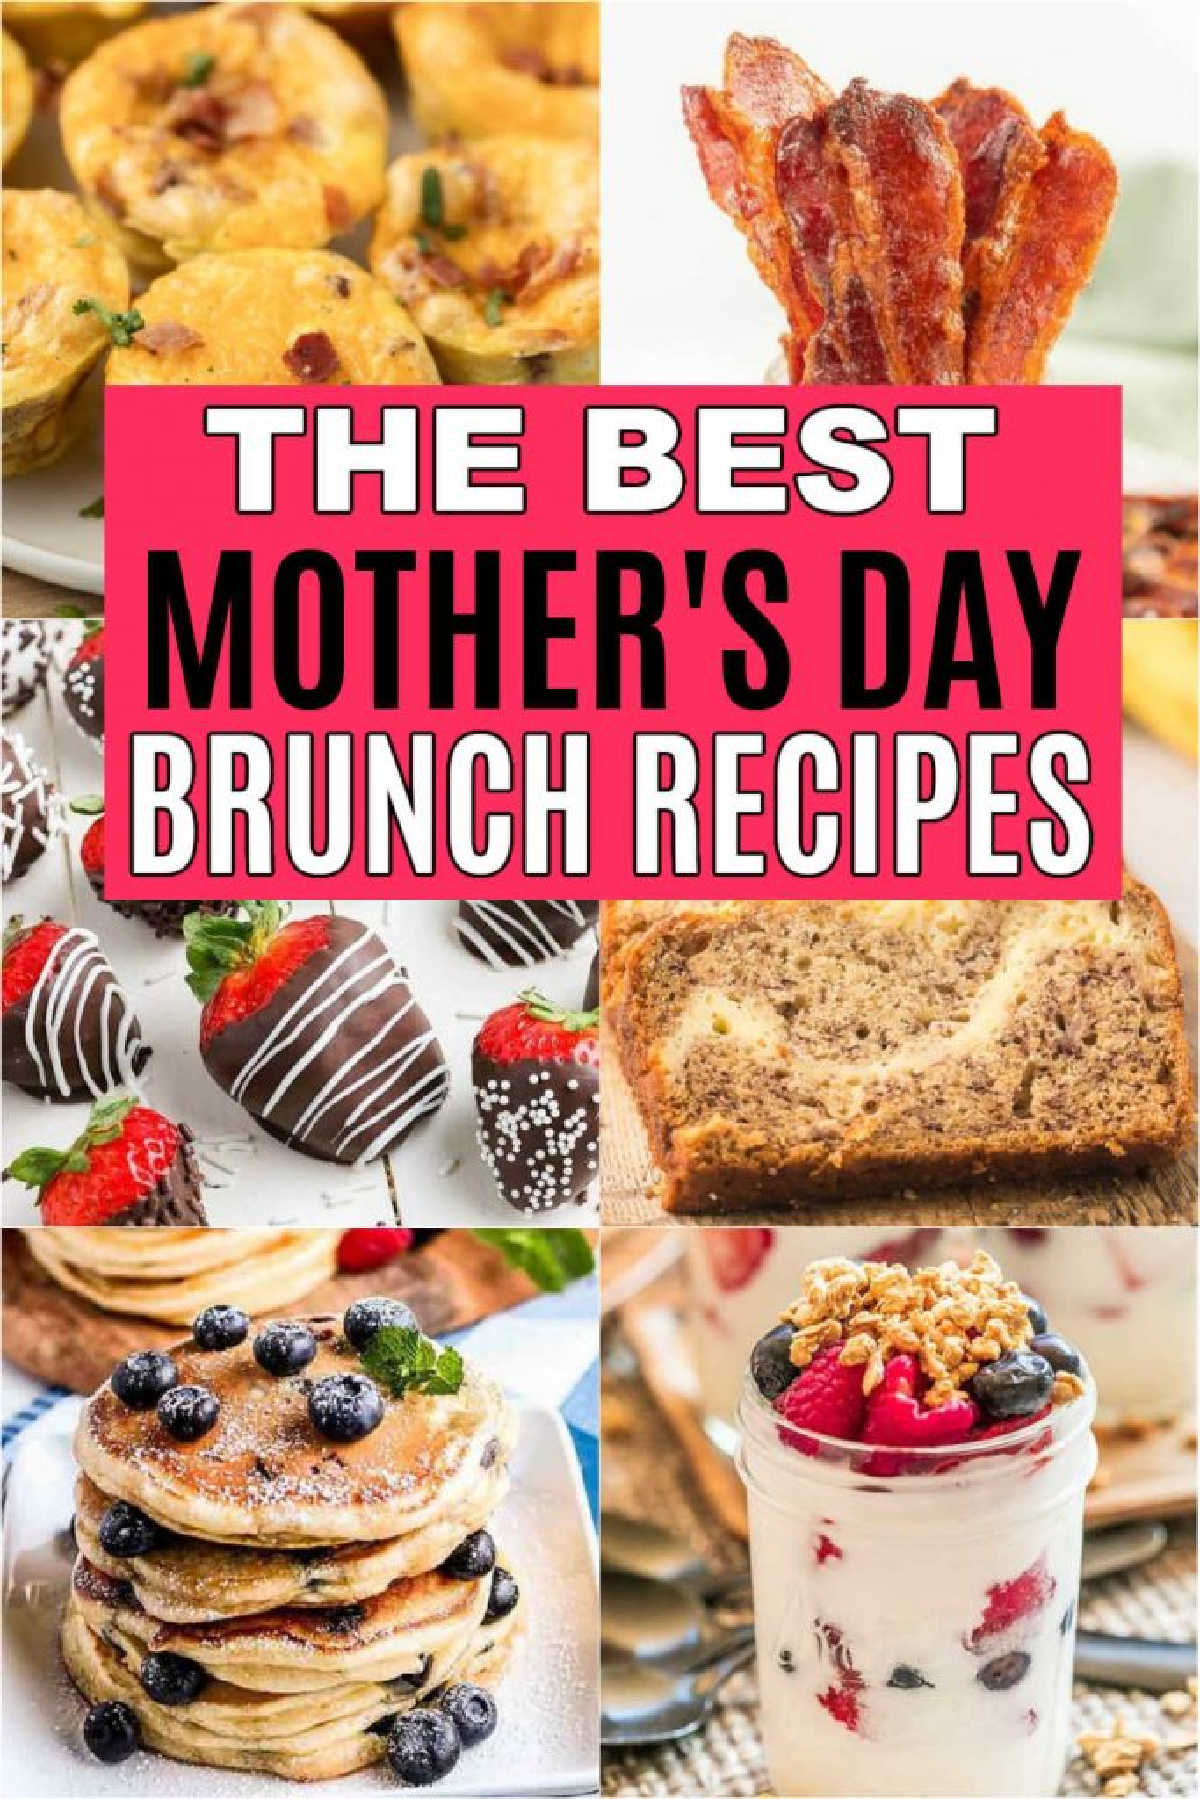 These Mother's Day Brunch Recipes are easy to prepare and delicious. Impress Mom with these simple brunch ideas sure to leave her feeling loved. These ideas include healthy recipes, breakfast casseroles and more of the Best brunch recipes to spoil your mama. #eatingonadime #brunchrecipes #mothersday #breakfastrecipes 
